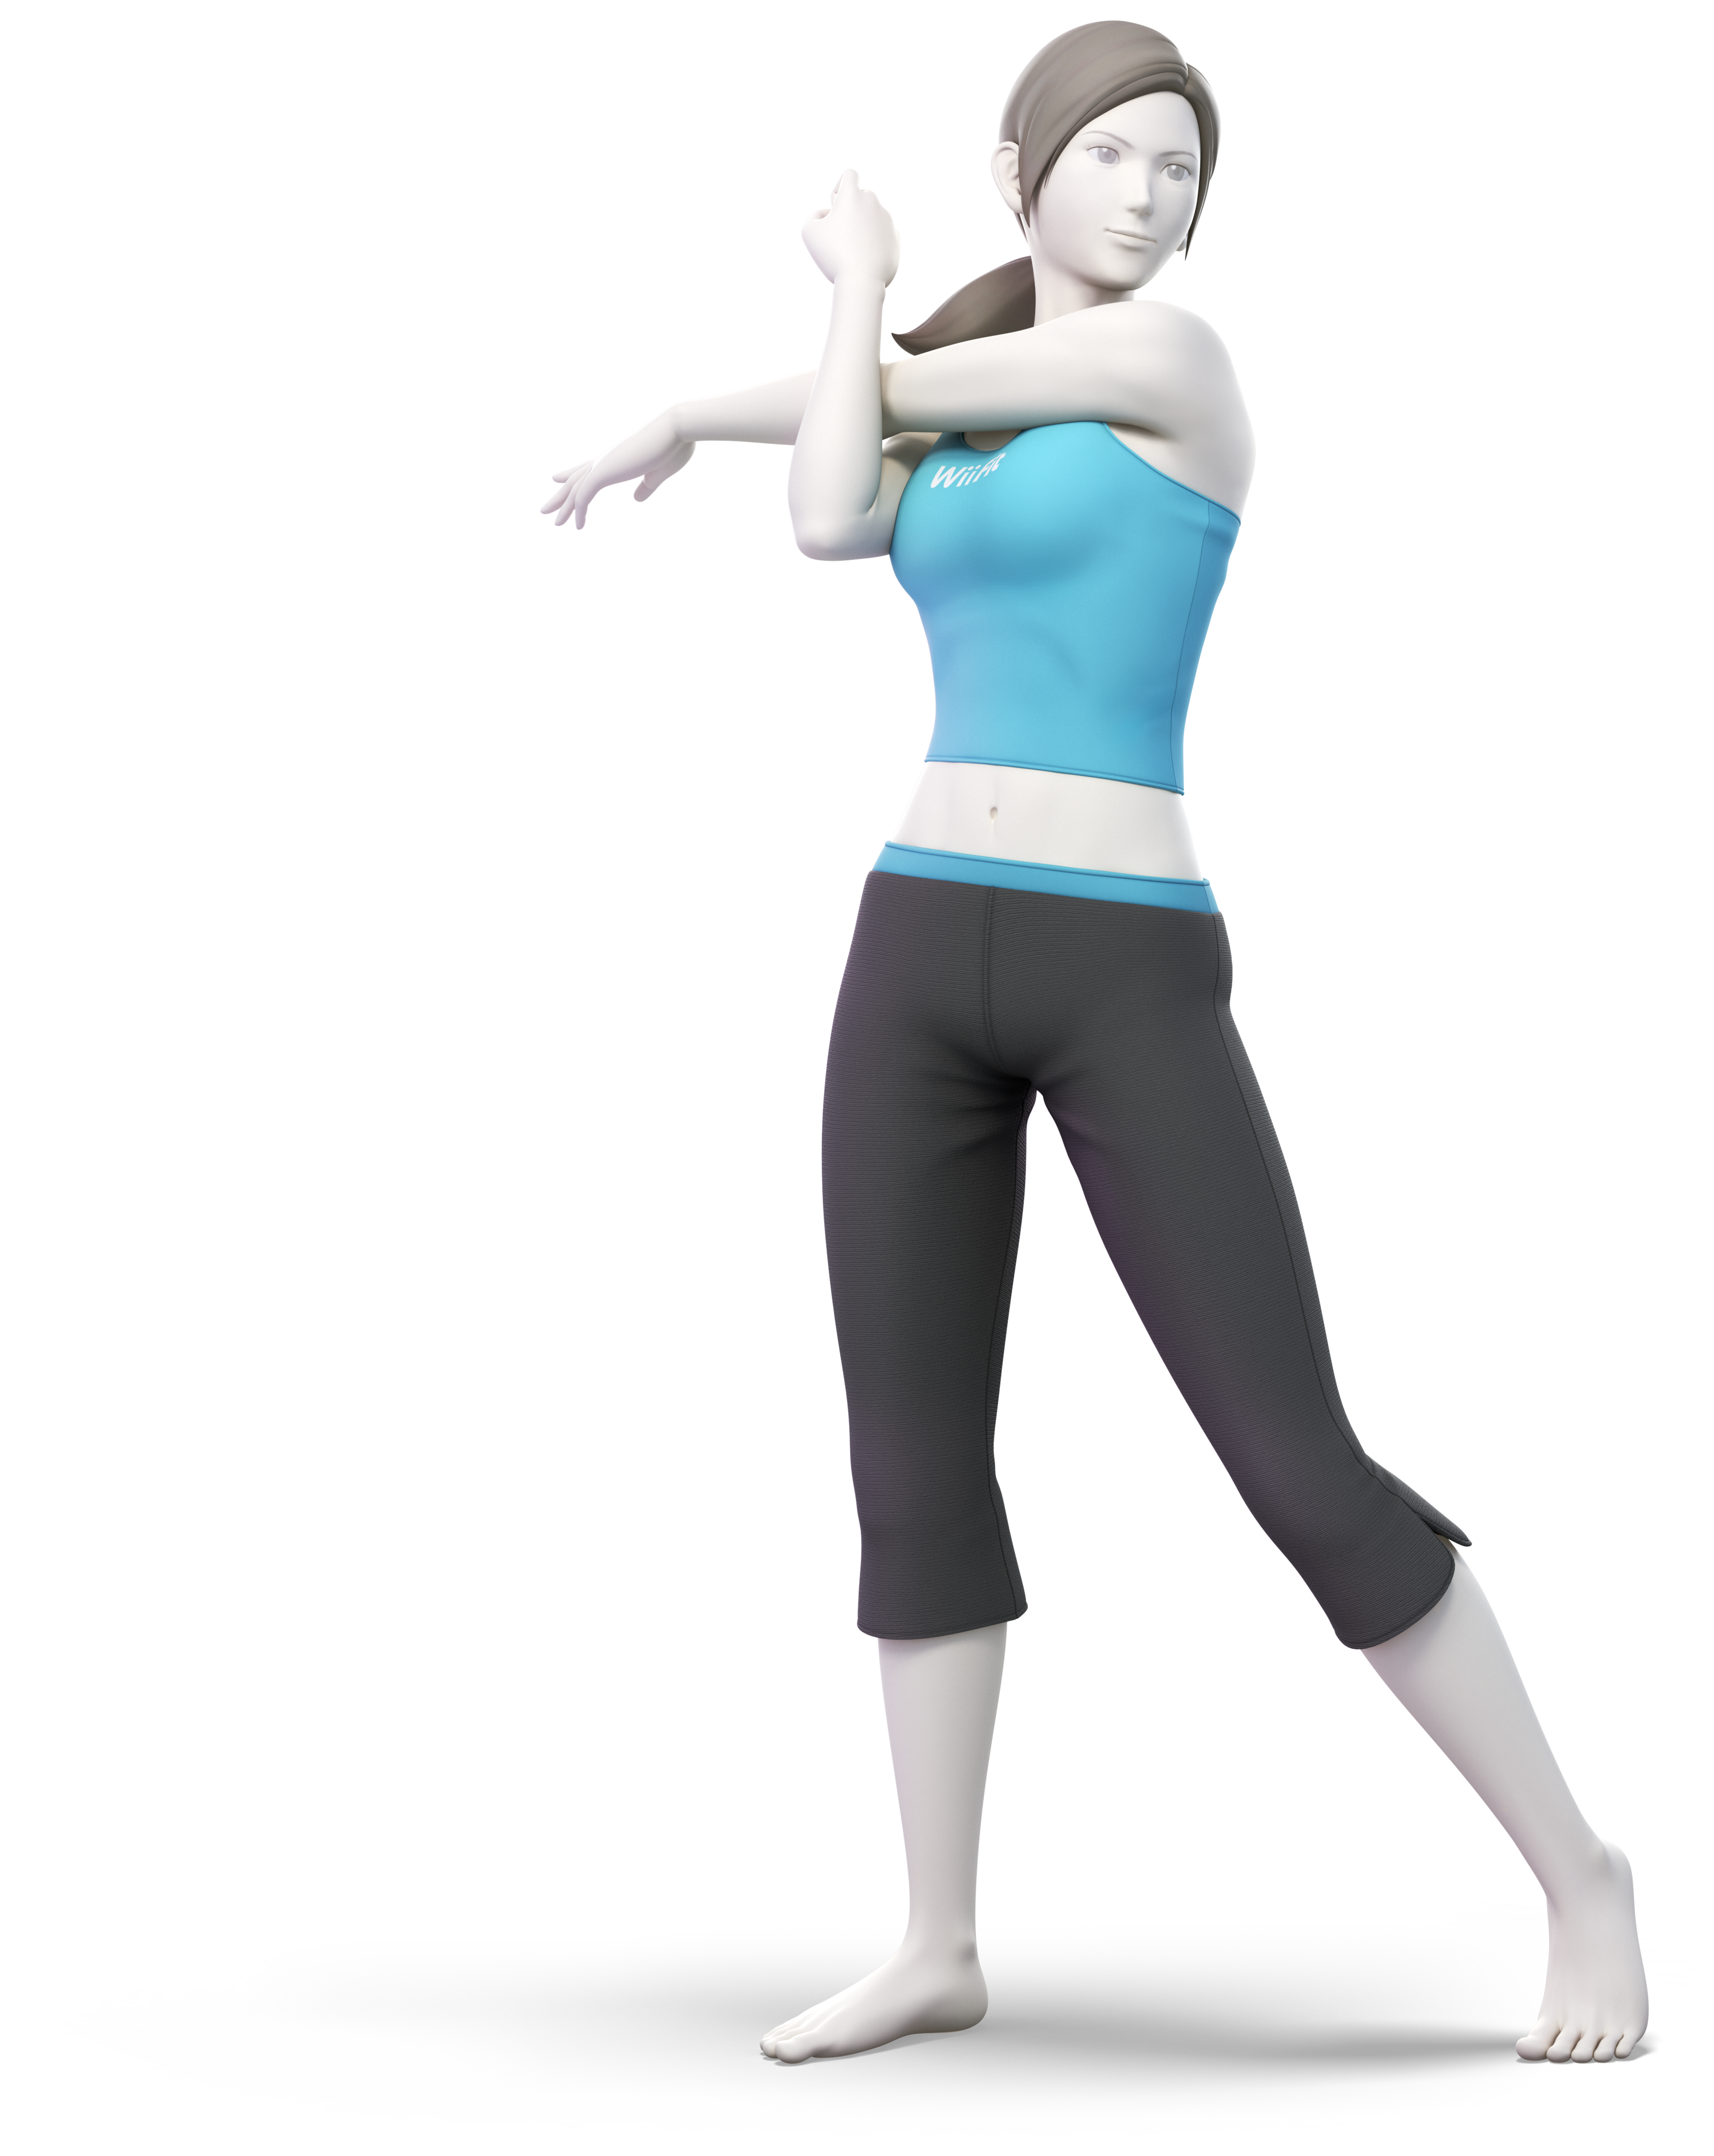 Wii fit. Wii Fit тренер. Nintendo Wii Fit Trainer. Inflation Wii Fit. Wii Fit Trainer from Wii Fit?.